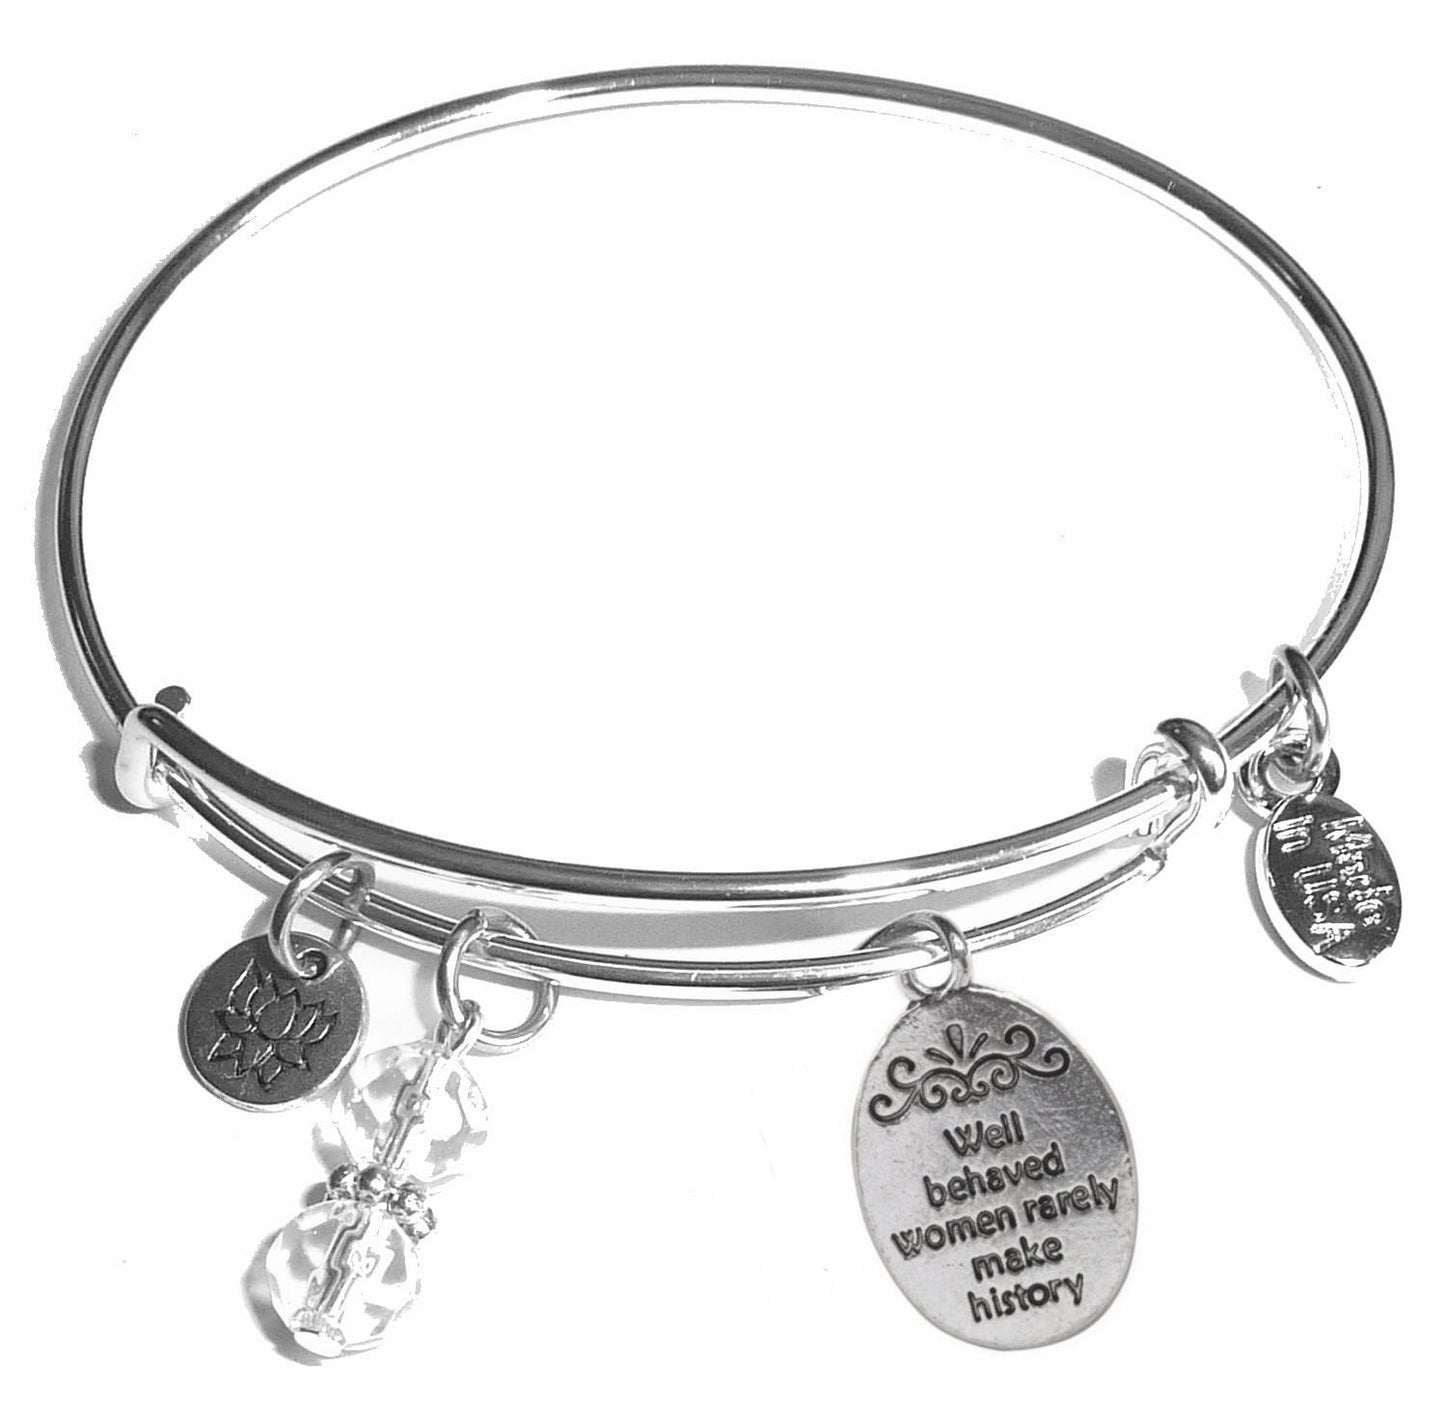 Well behaved women rarely make history- Message Bangle Bracelet - Expandable Wire Bracelet– Comes in a gift box